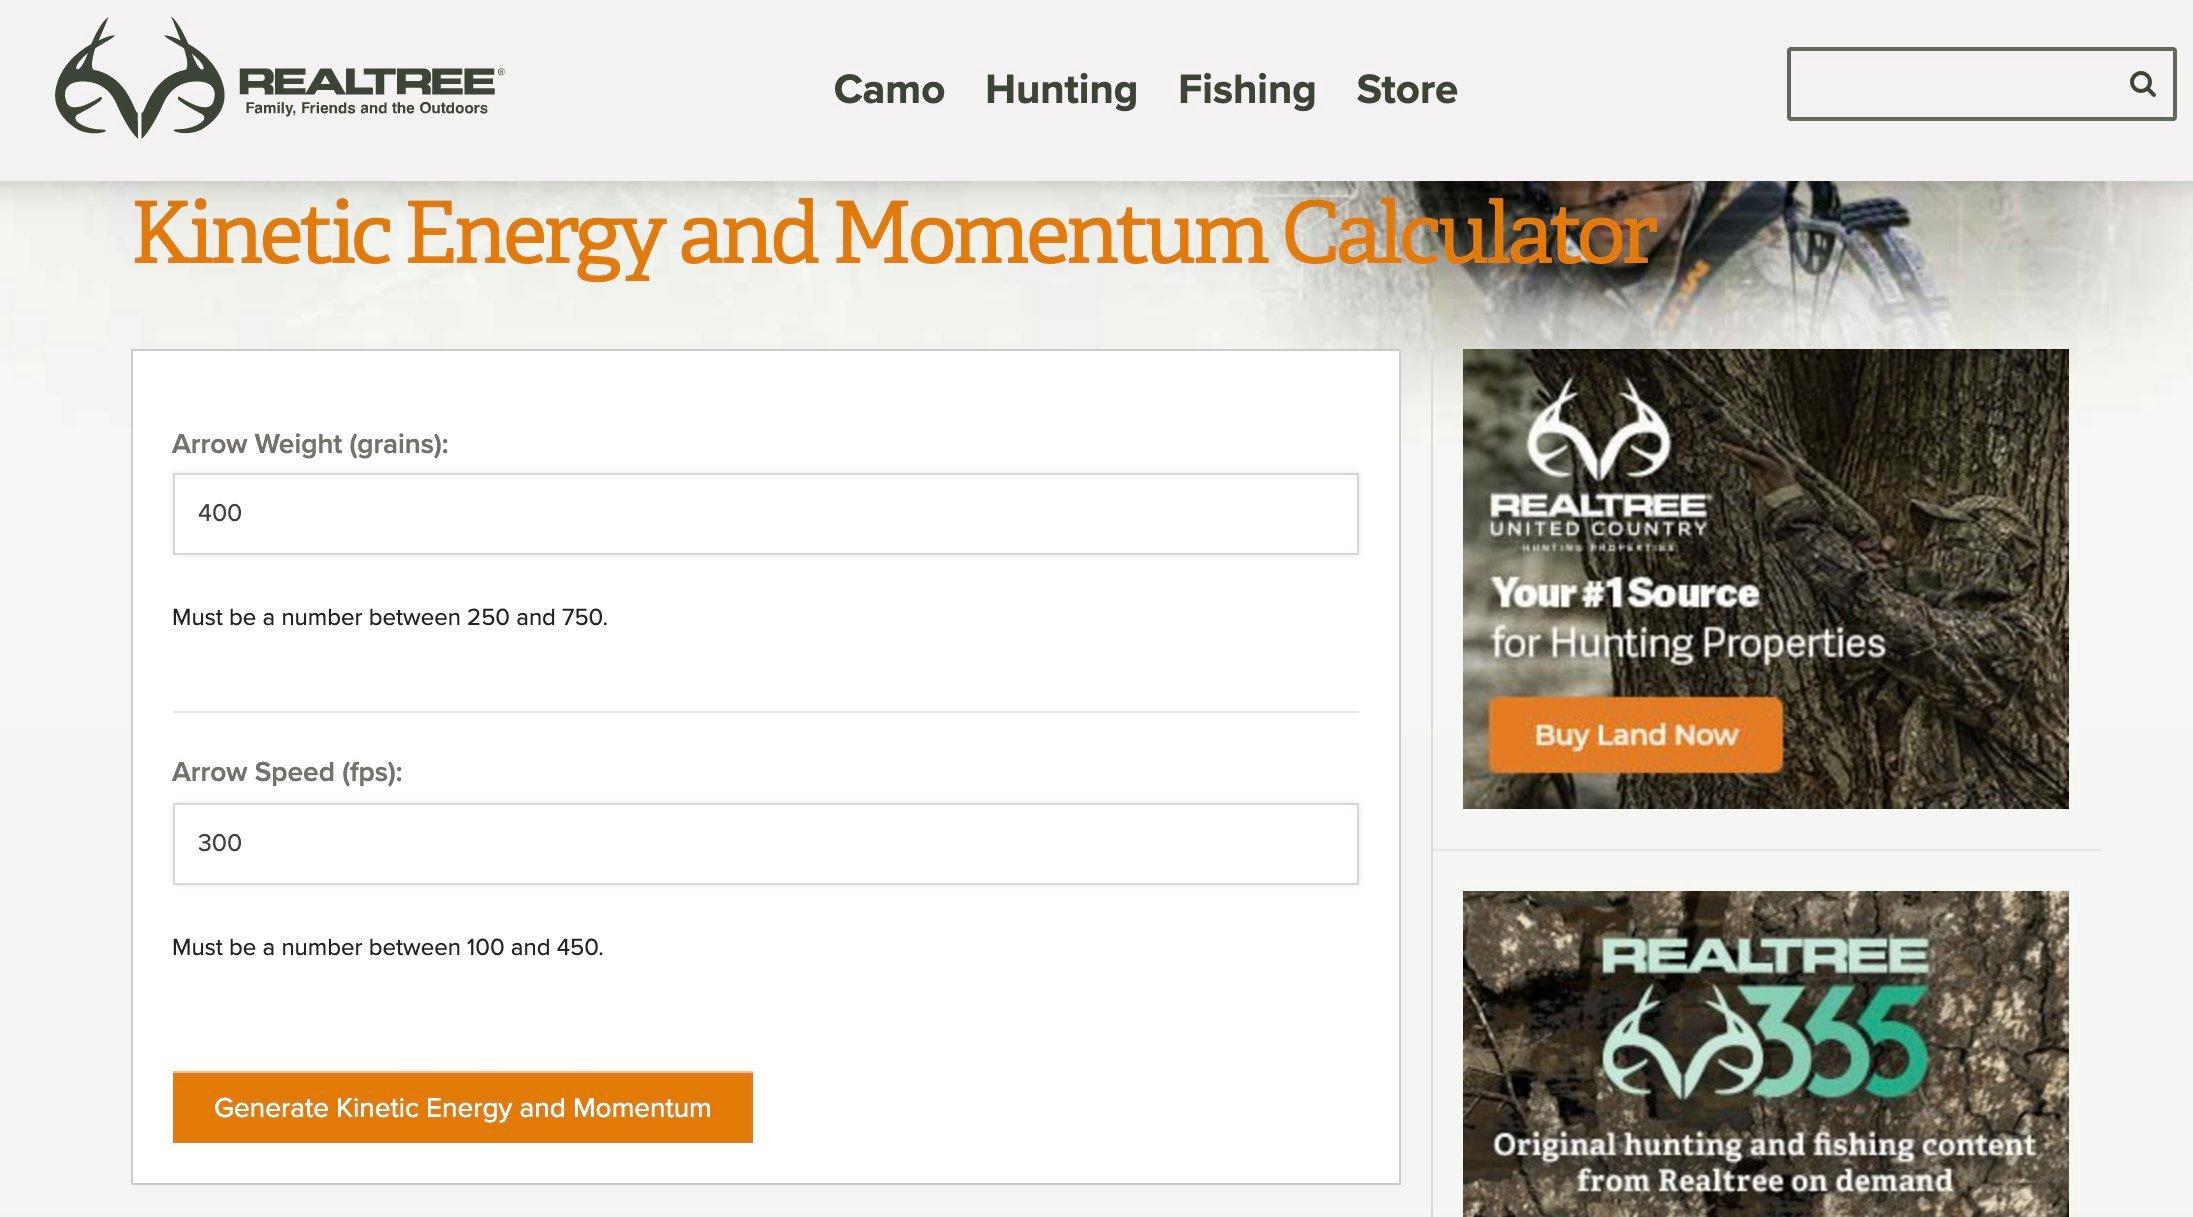 If you know your arrow weight and speed, use Realtree's KE and Momentum calculator to figure out what your bow will do. 